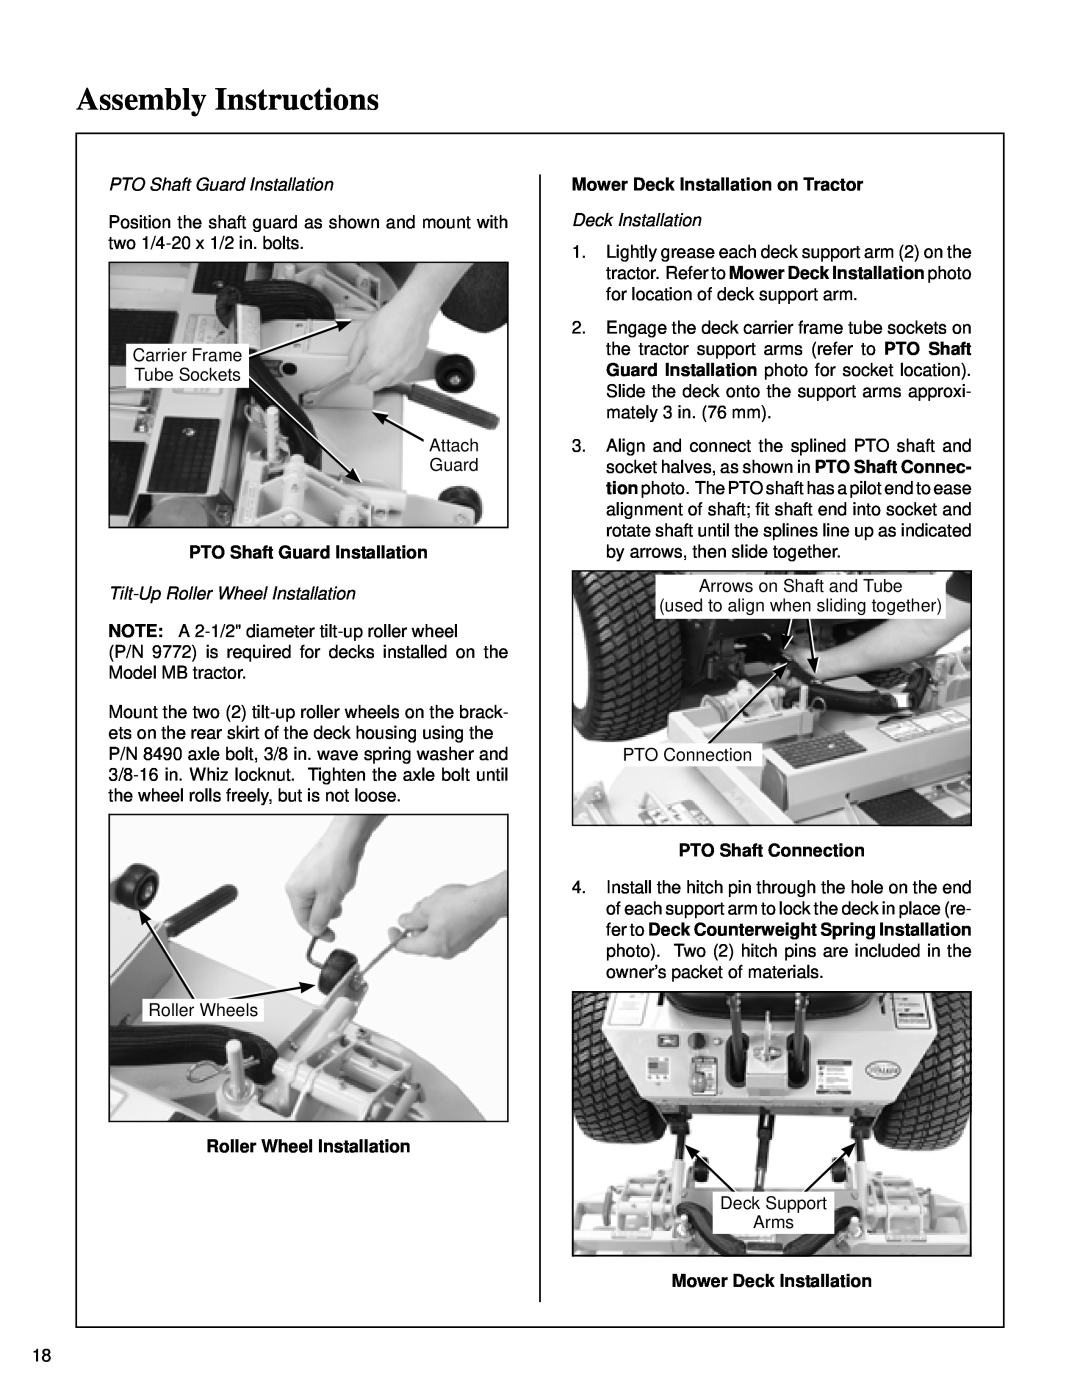 Briggs & Stratton MB (18 HP) owner manual Assembly Instructions, PTO Shaft Guard Installation, Roller Wheel Installation 